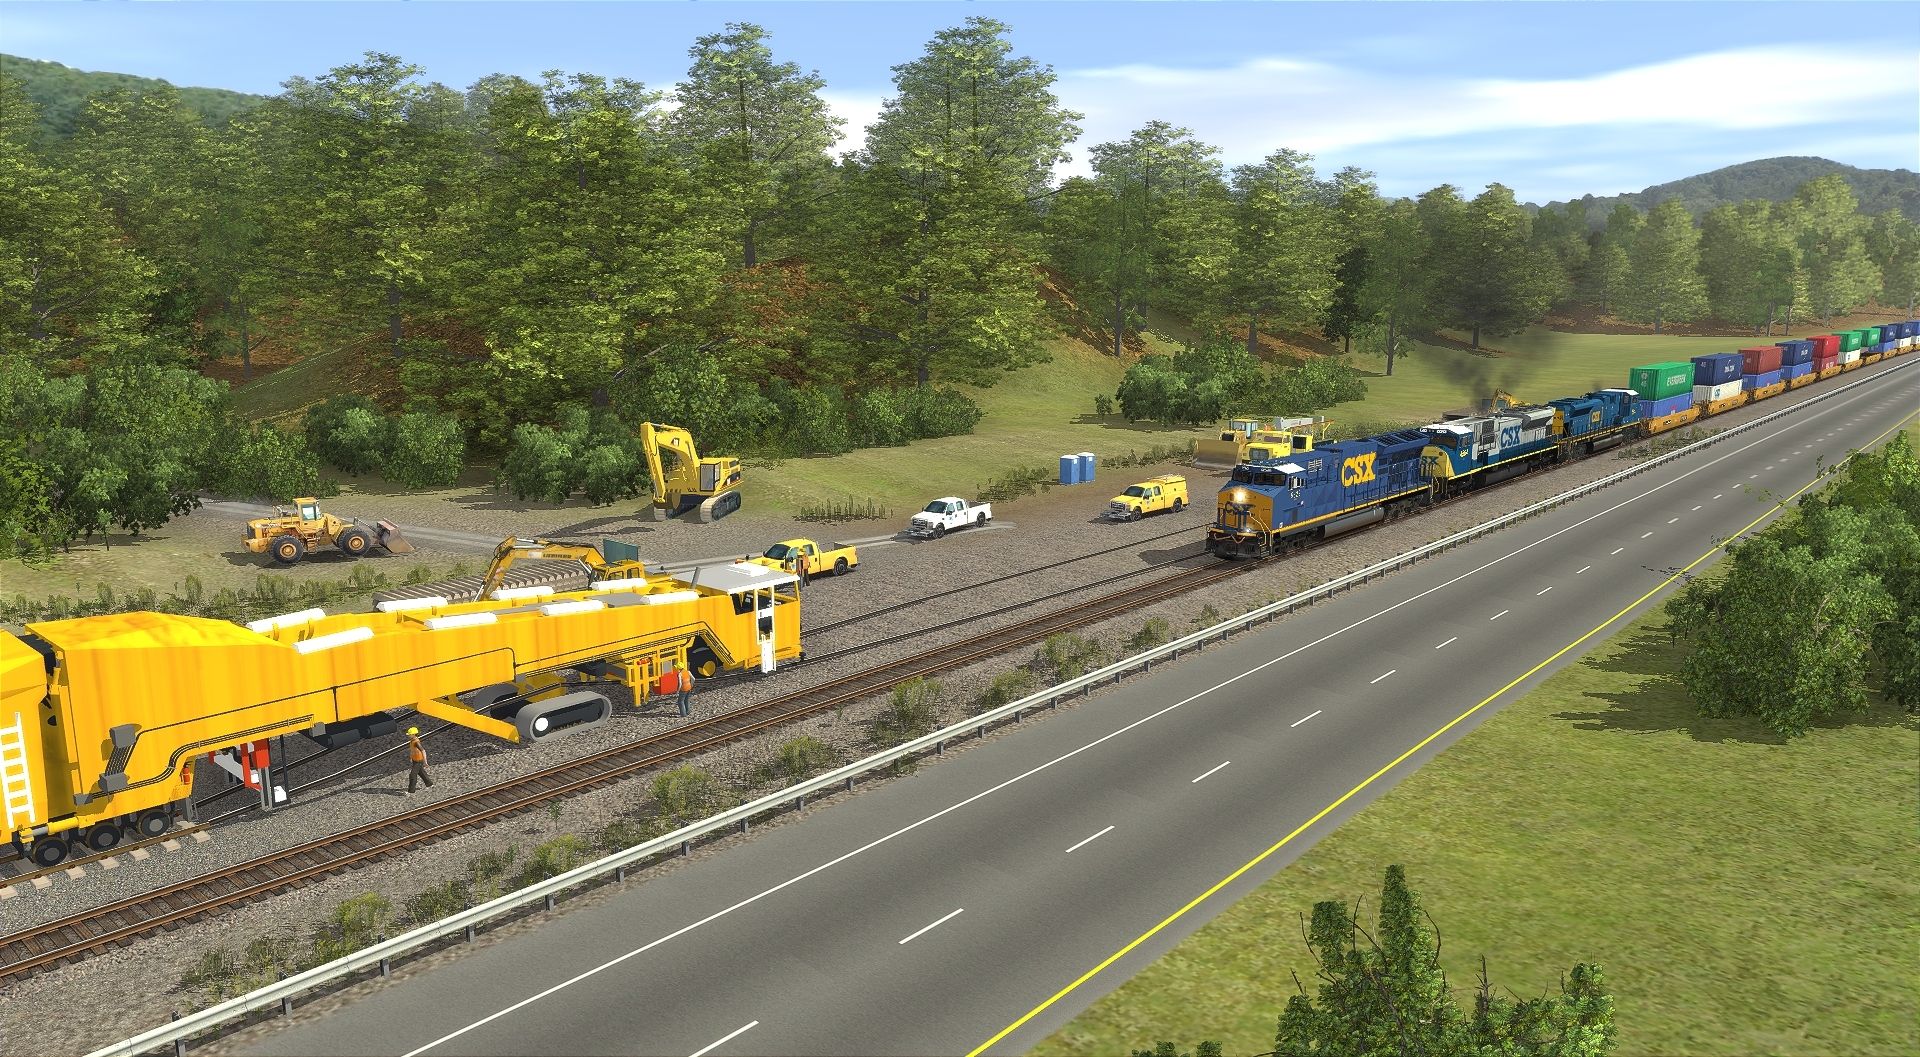 New-rail-with-concrete-sleepers.jpg